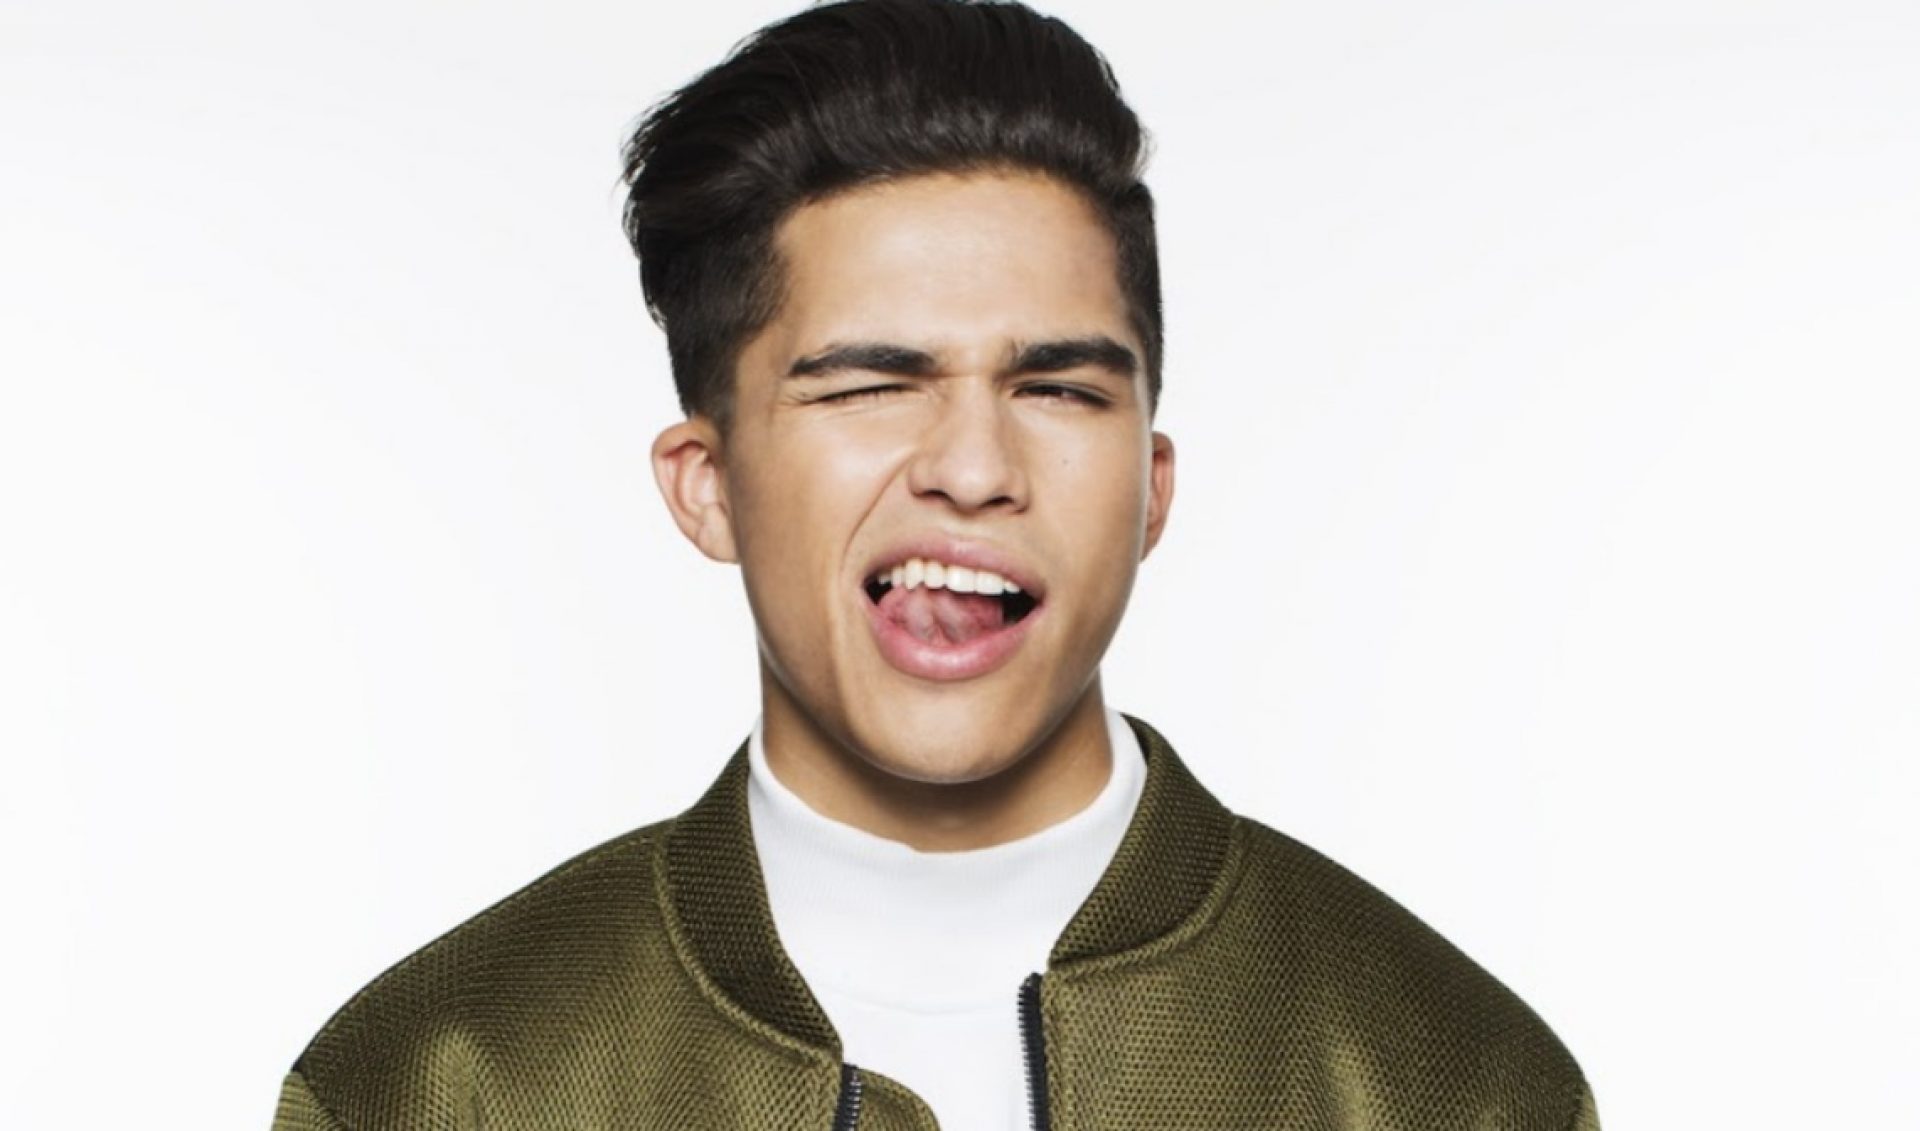 US Tennis Association Hopes To Excite Youngsters With Help From YouTube Stars Alex Aiono, Jack & Jack